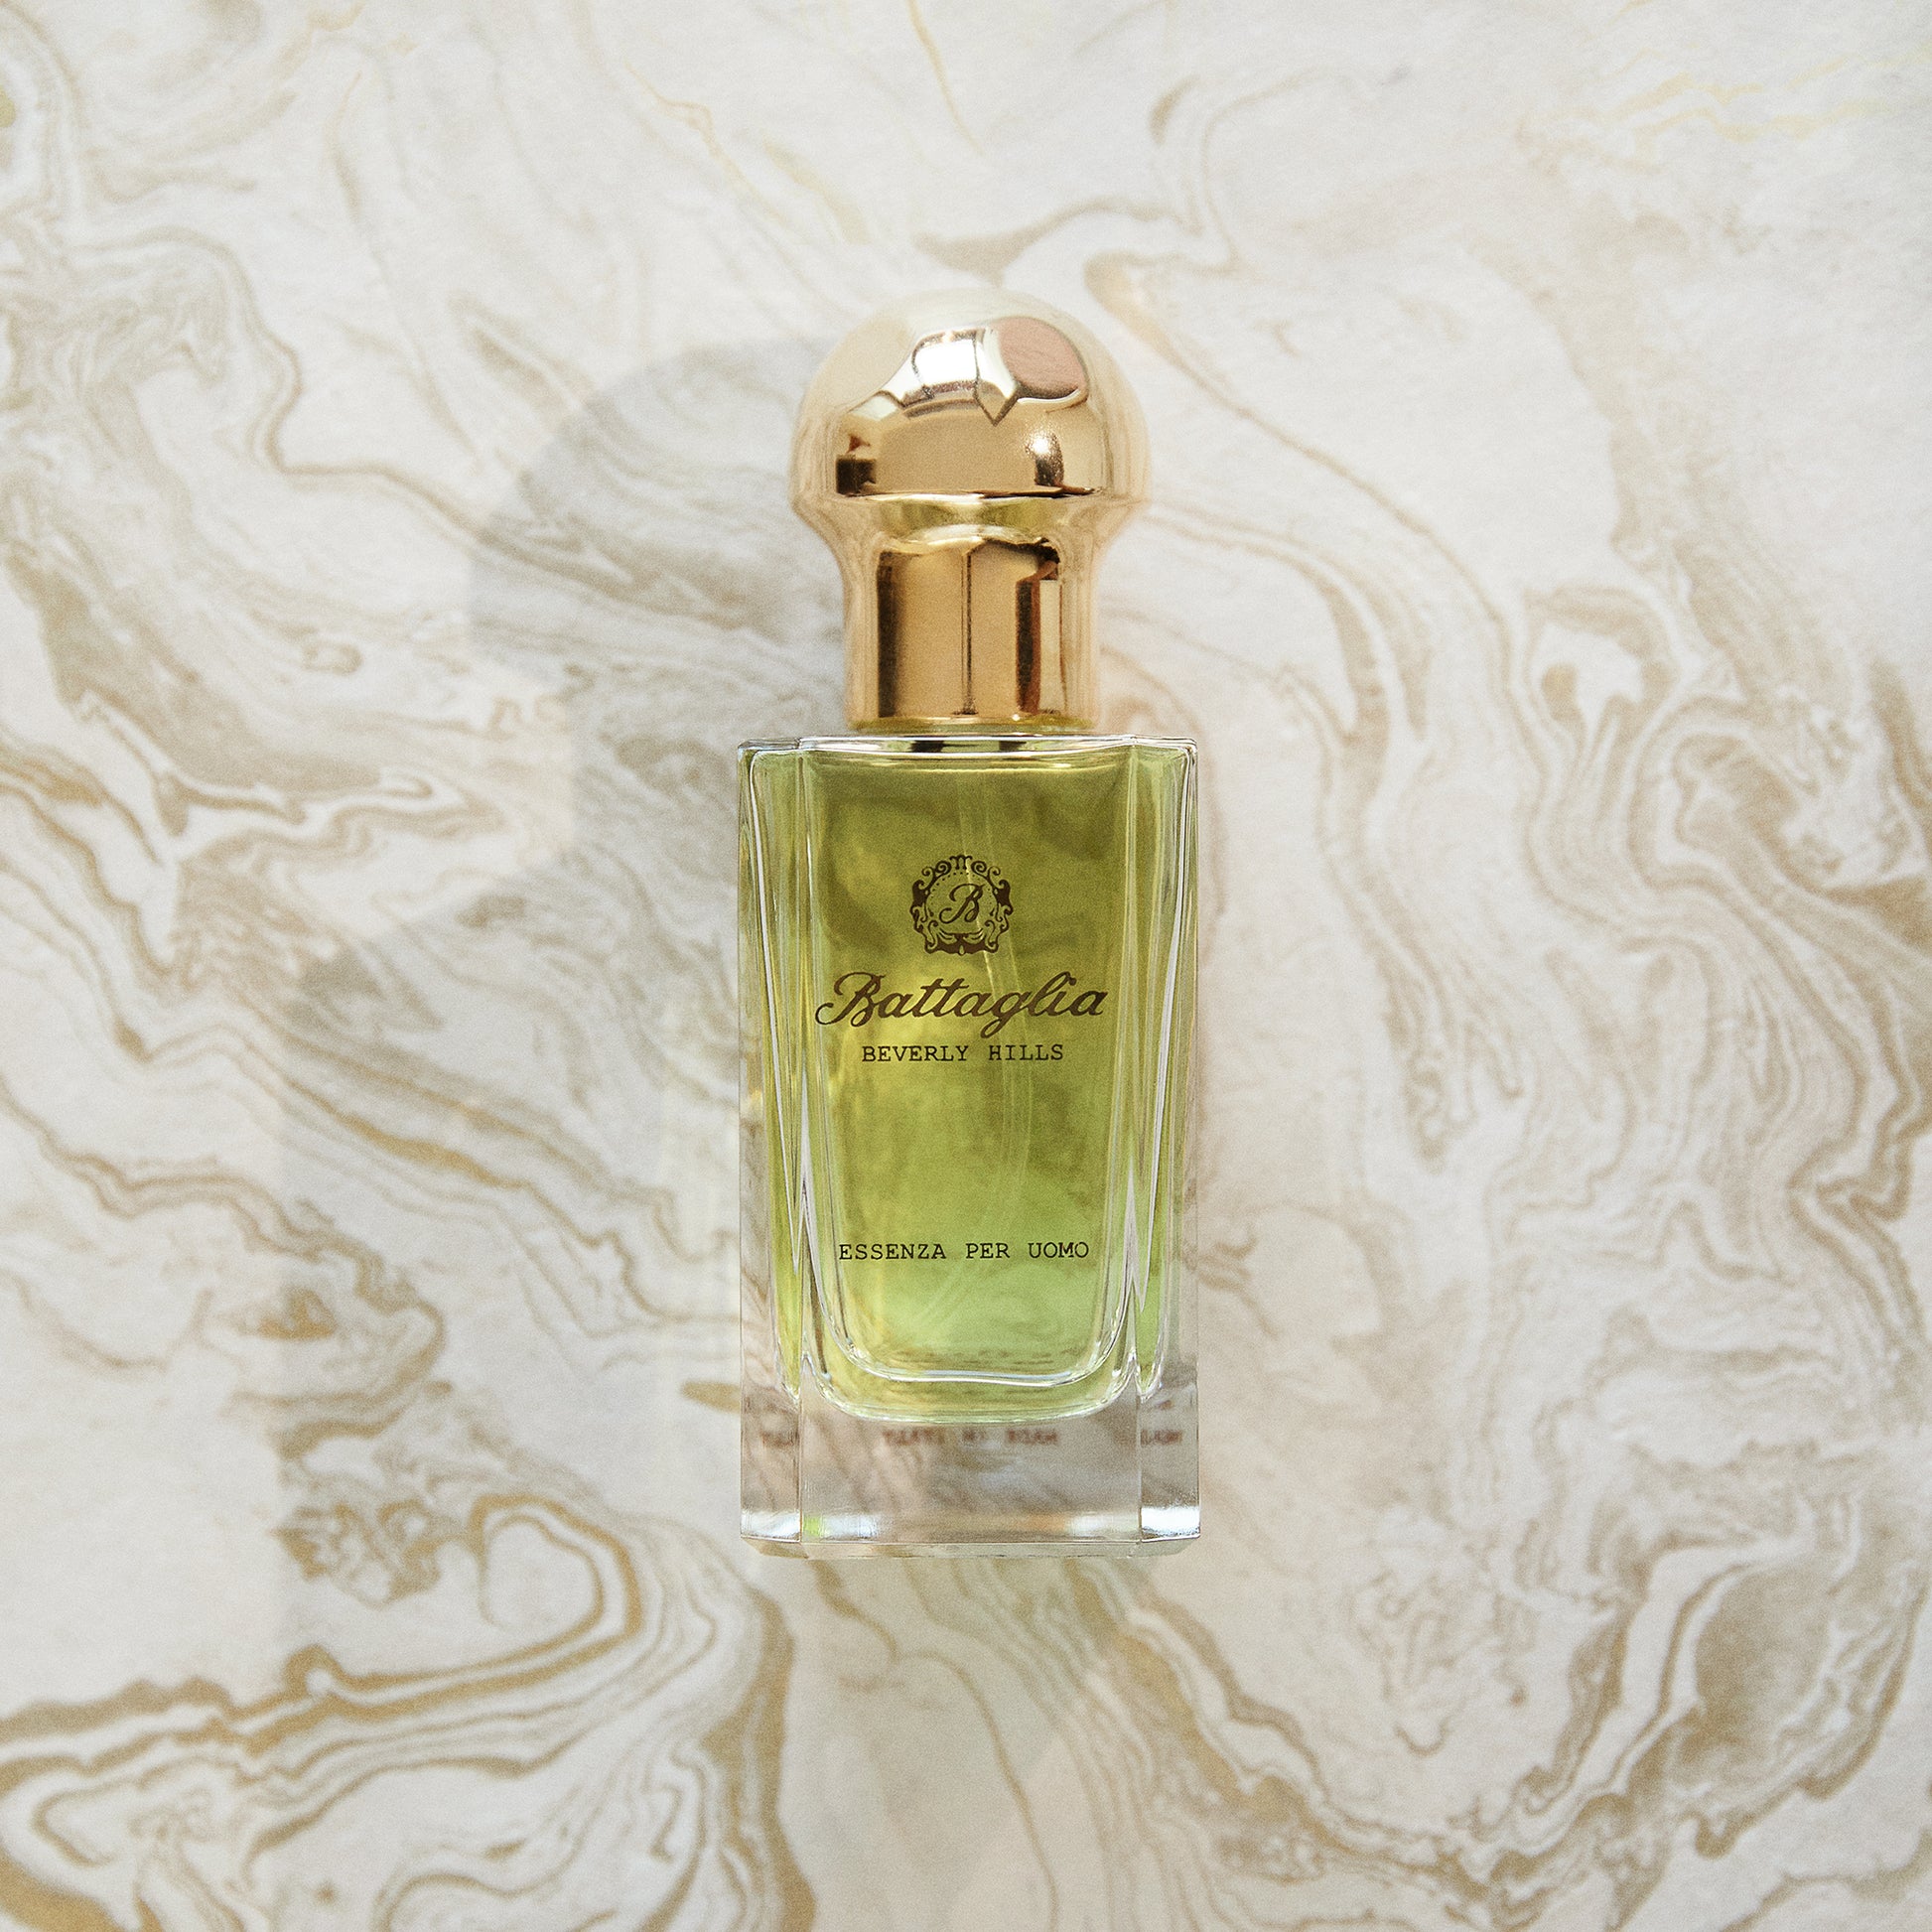 A photo of the Essenza per Uomo fragrance by Battaglia against a gold marbled paper background. The bottle is rectangular with a light green liquid and a gold circular cap.